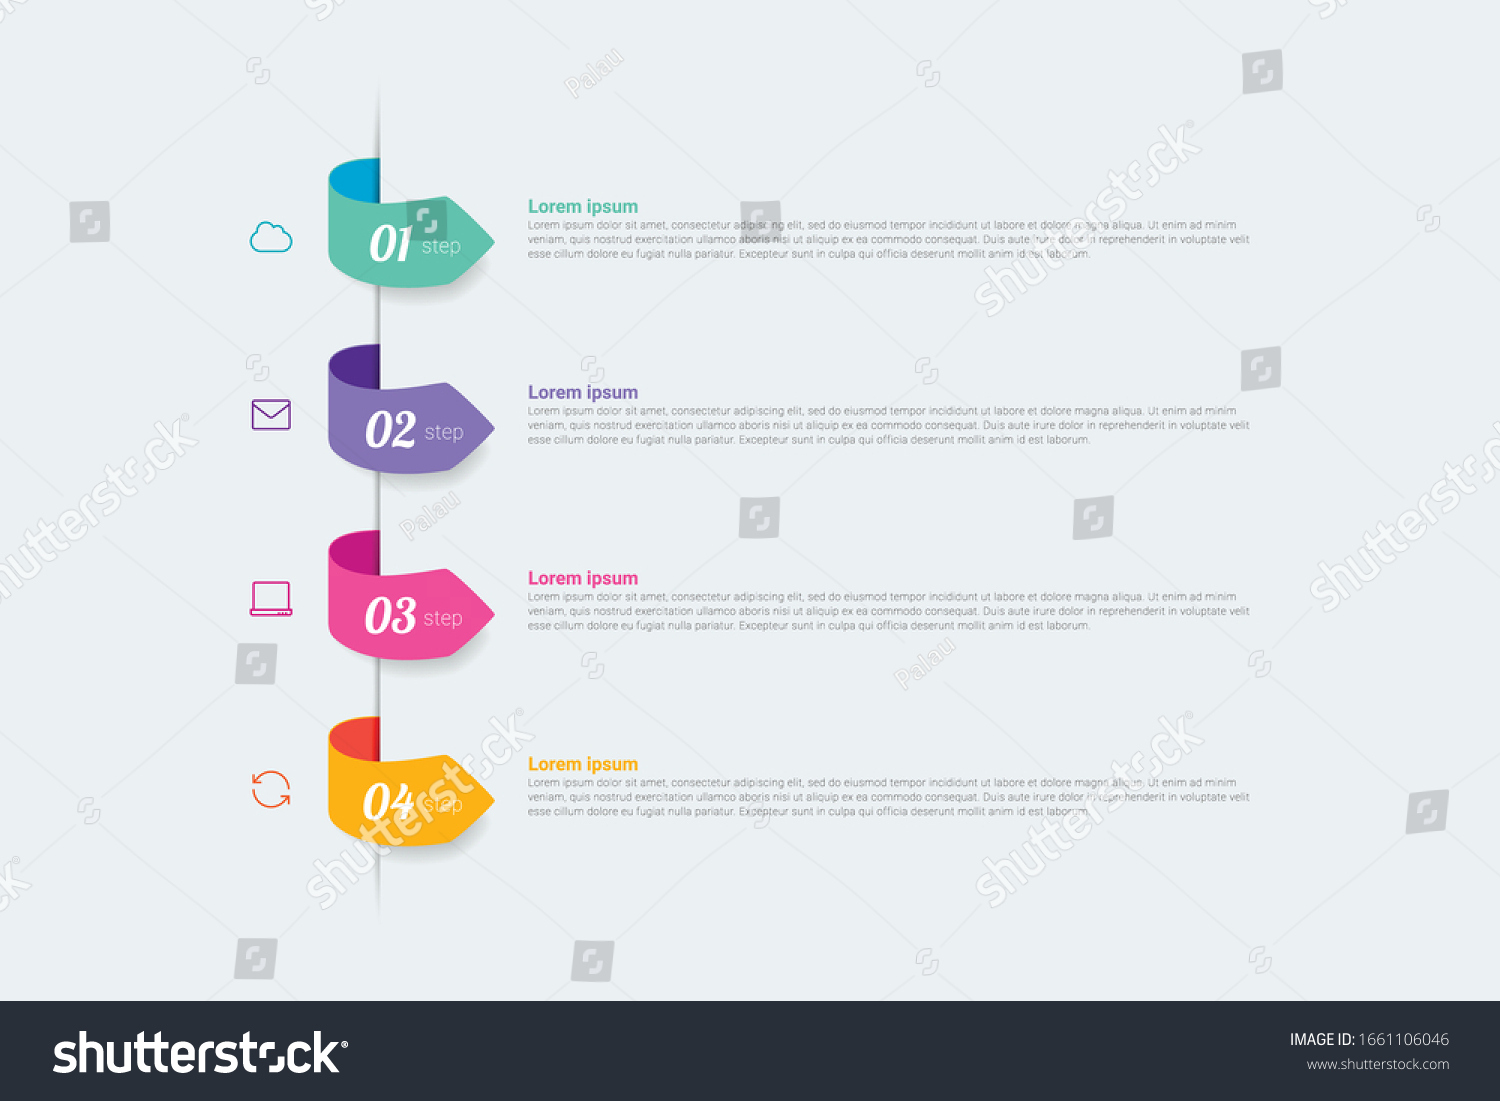 Infographics design vector and marketing icons with 4 options, steps or processes. Can be used for annual report, flow charts, diagram, presentations. Concept of business model. Vector illustration. #1661106046